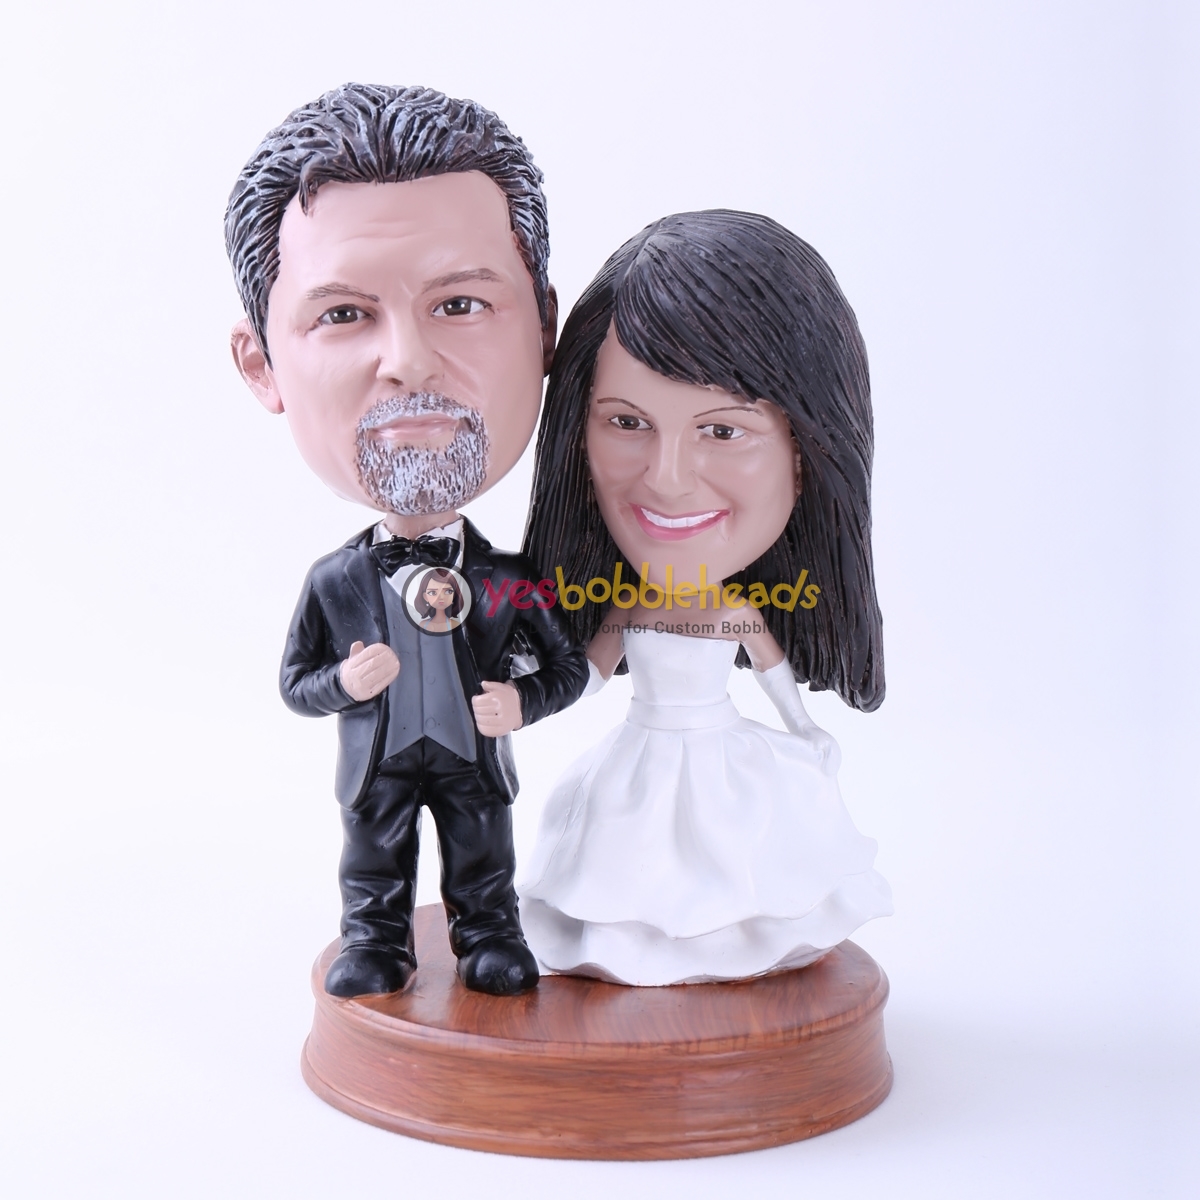 Picture of Custom Bobblehead Doll: Black Suit Groom and White Dressed Bride